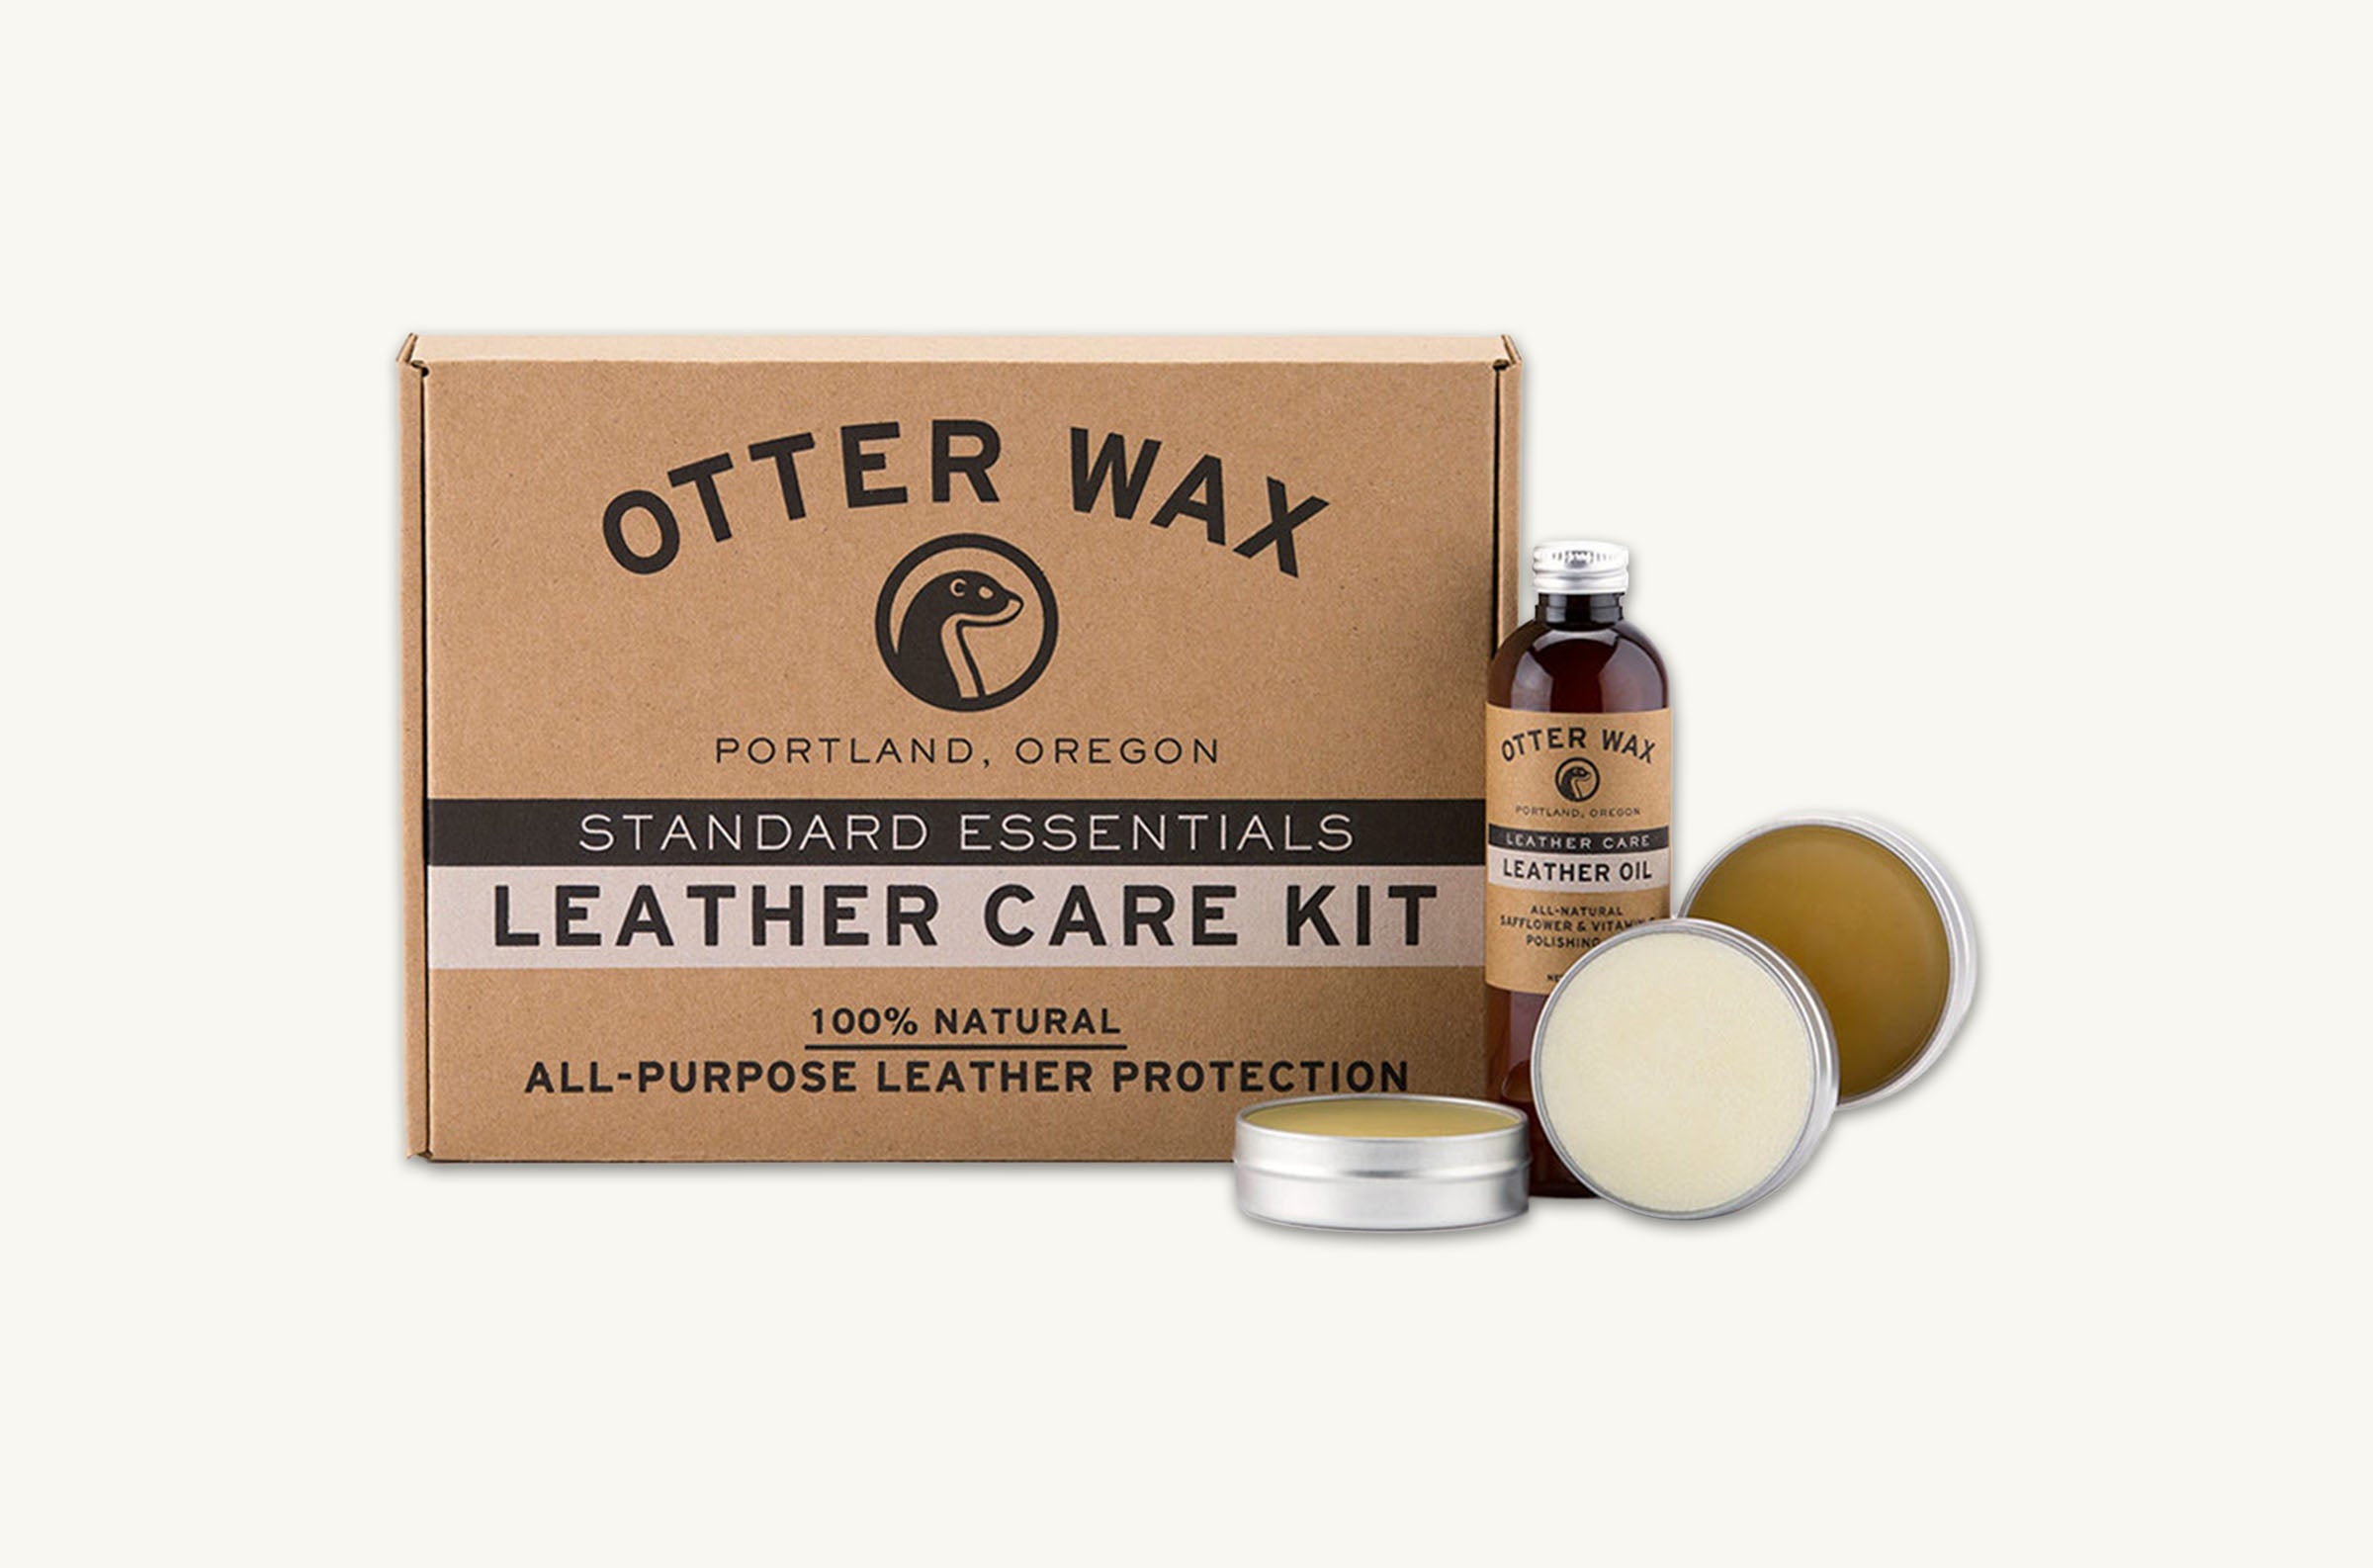 Leather Boot Care - Saddle Soap vs Bees Wax 